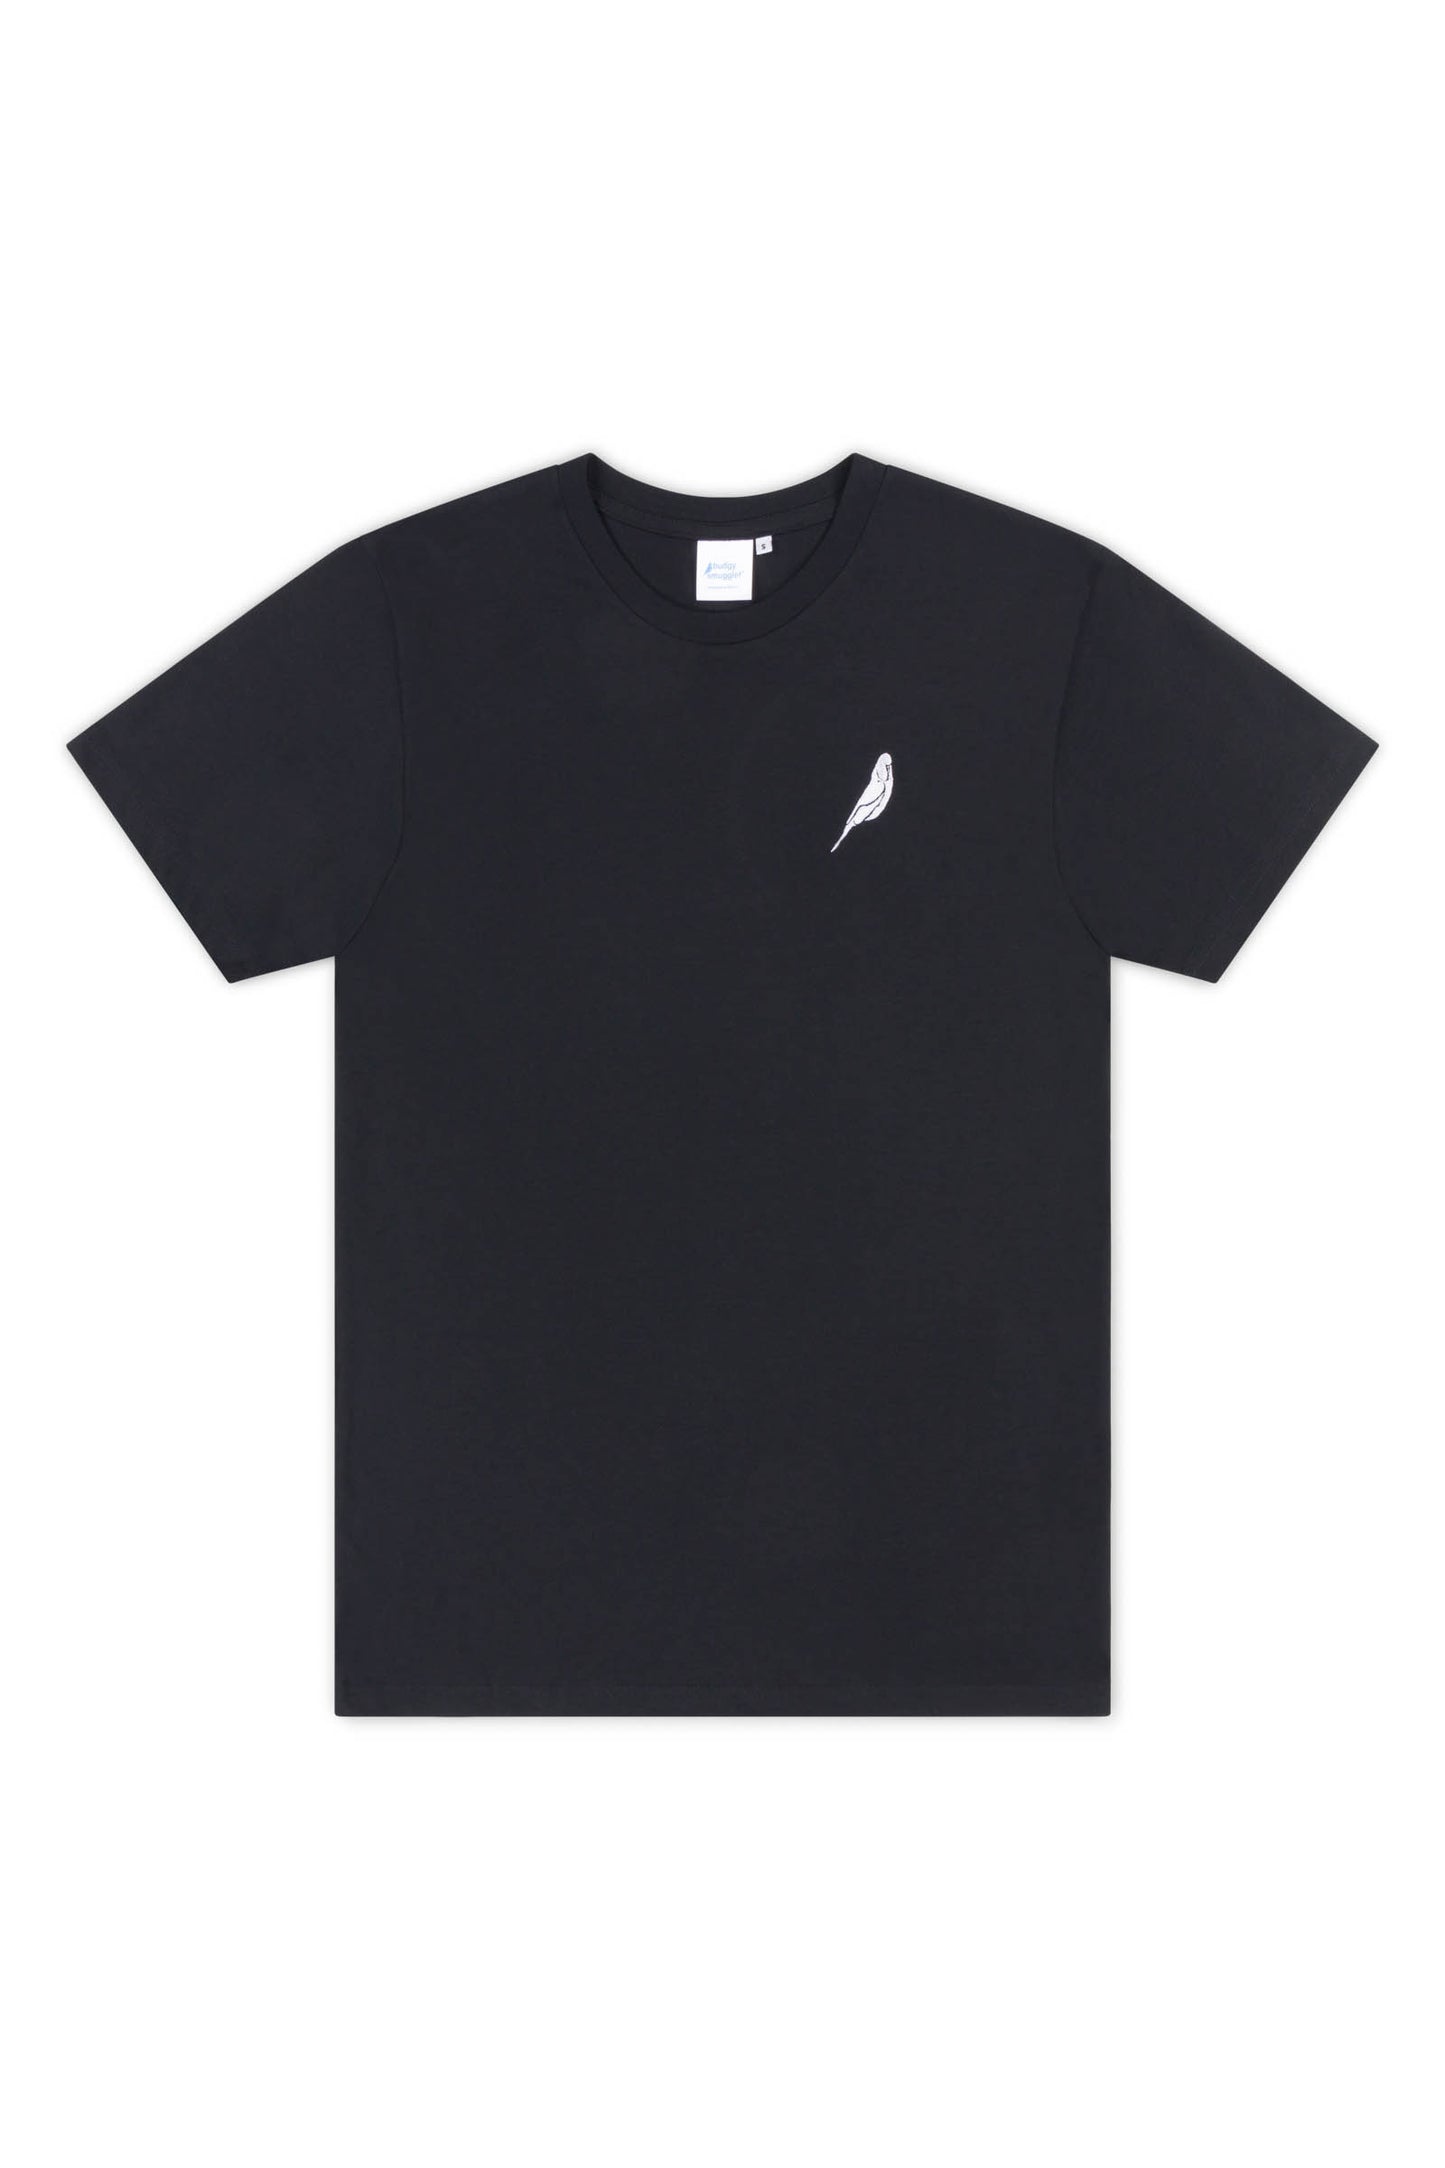 Budgy London Tee in Black